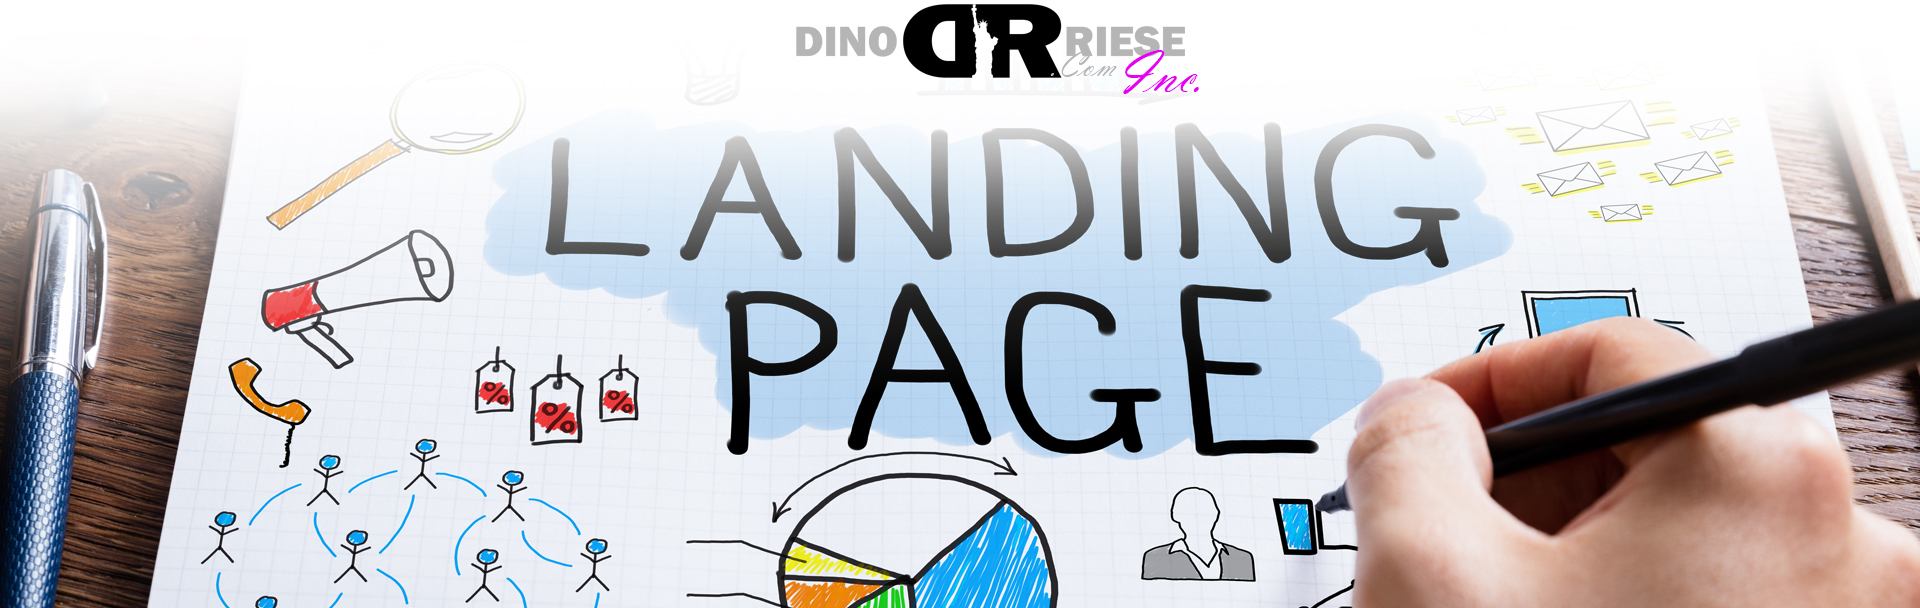 Landing Page Professional Services | DinoRiese.com Inc. - Image